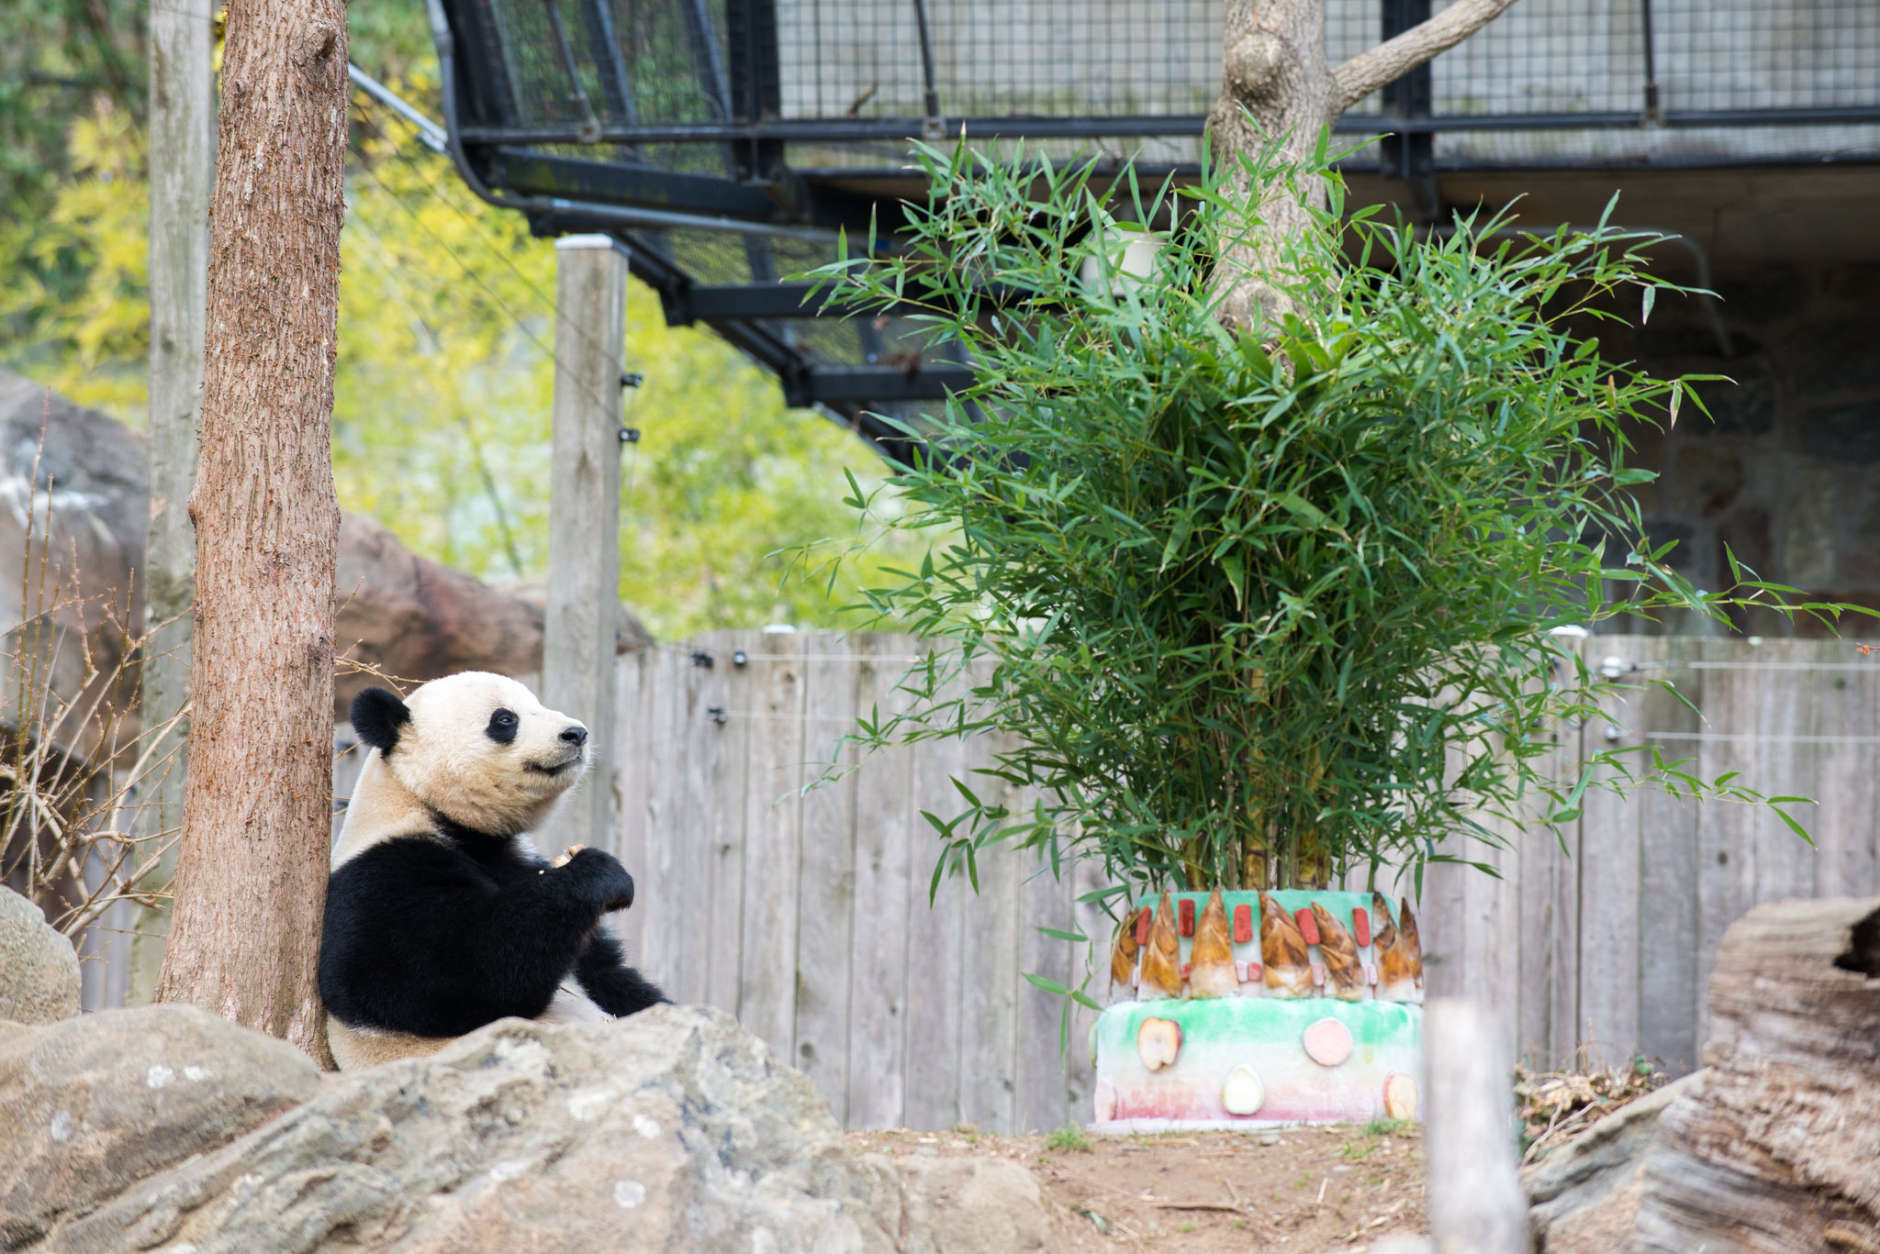 While there will be no movie during Bao Bao's 16-hour flight, she will enjoy plenty of her favorite snacks. (Courtesy Smithsonian National Zoo)